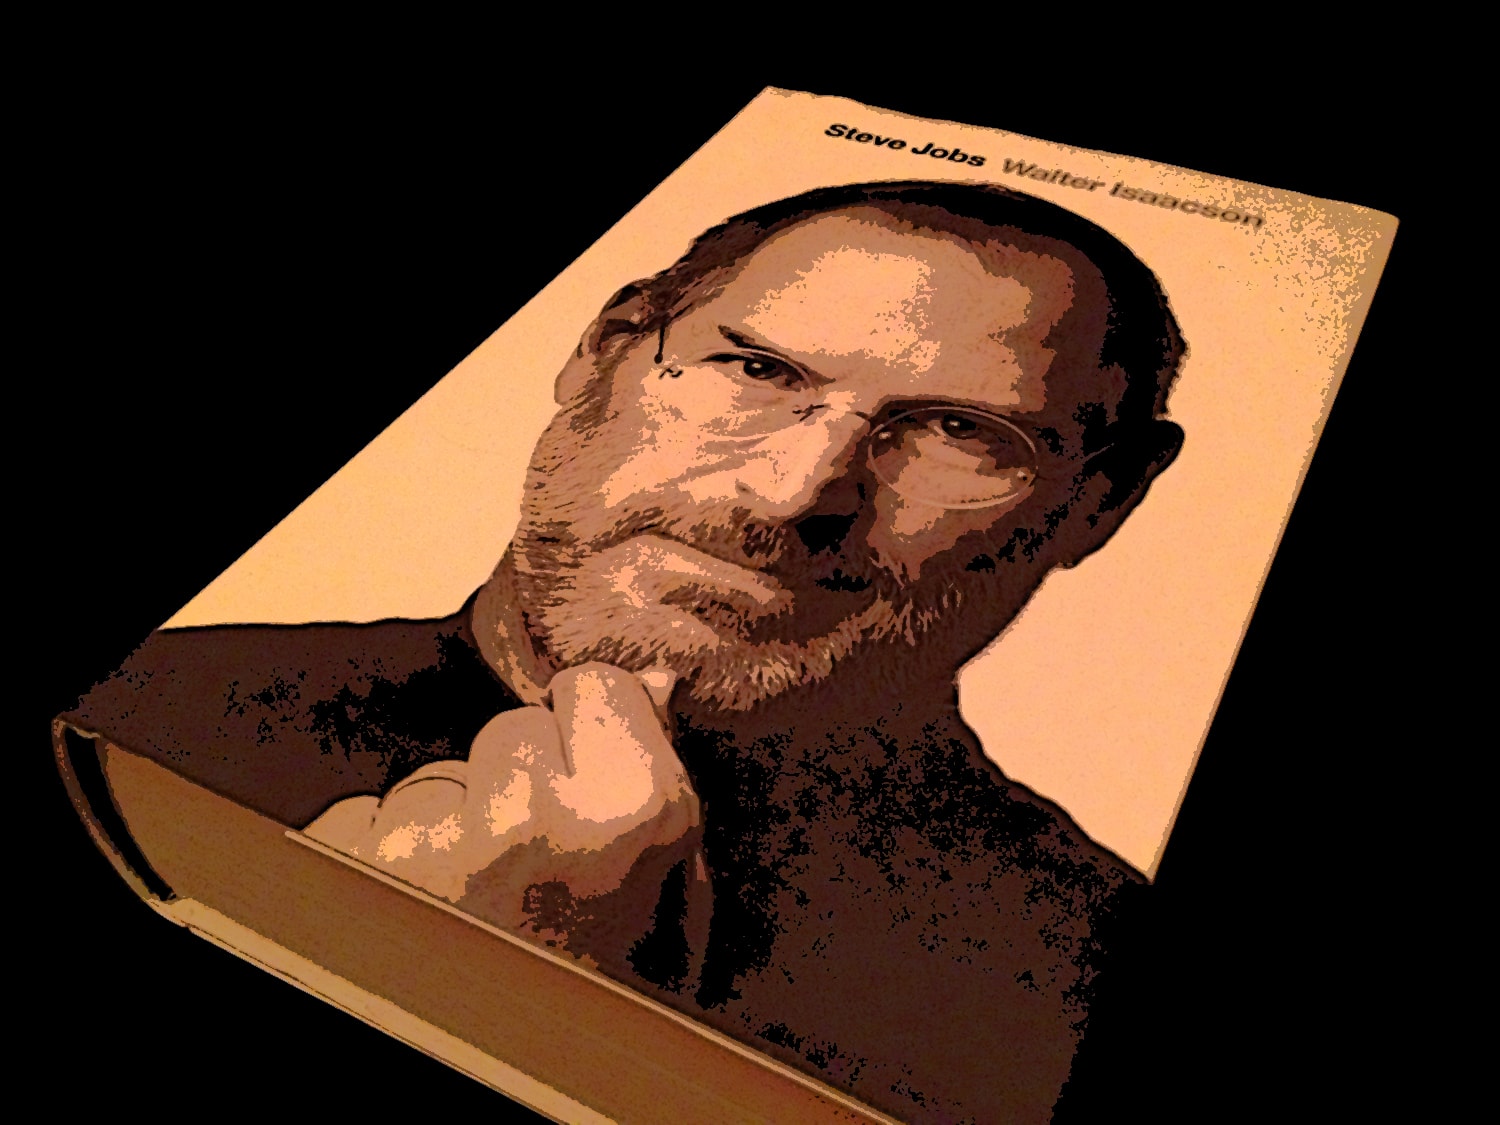 How much would Steve Jobs be worth today?